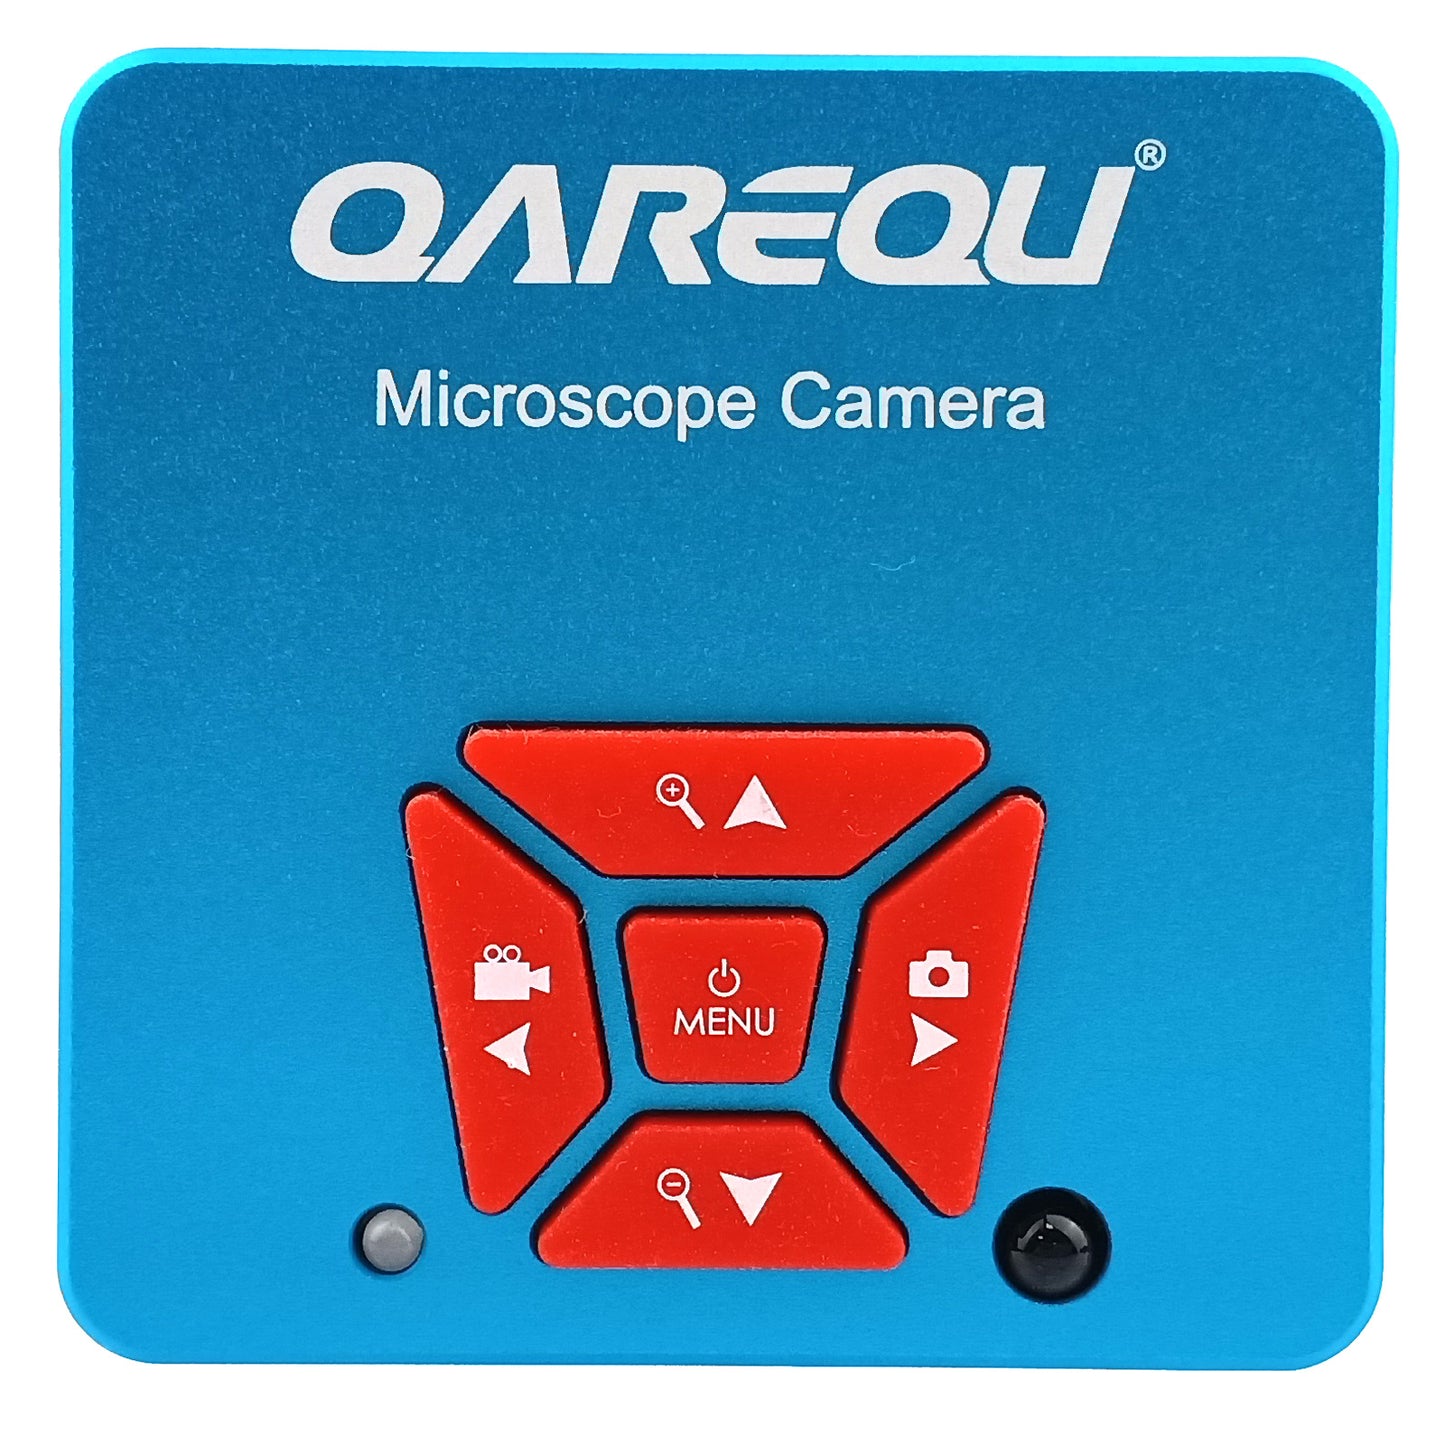 C60 HDMI Microscope Camera Kit (with Light, Lens, Stand)